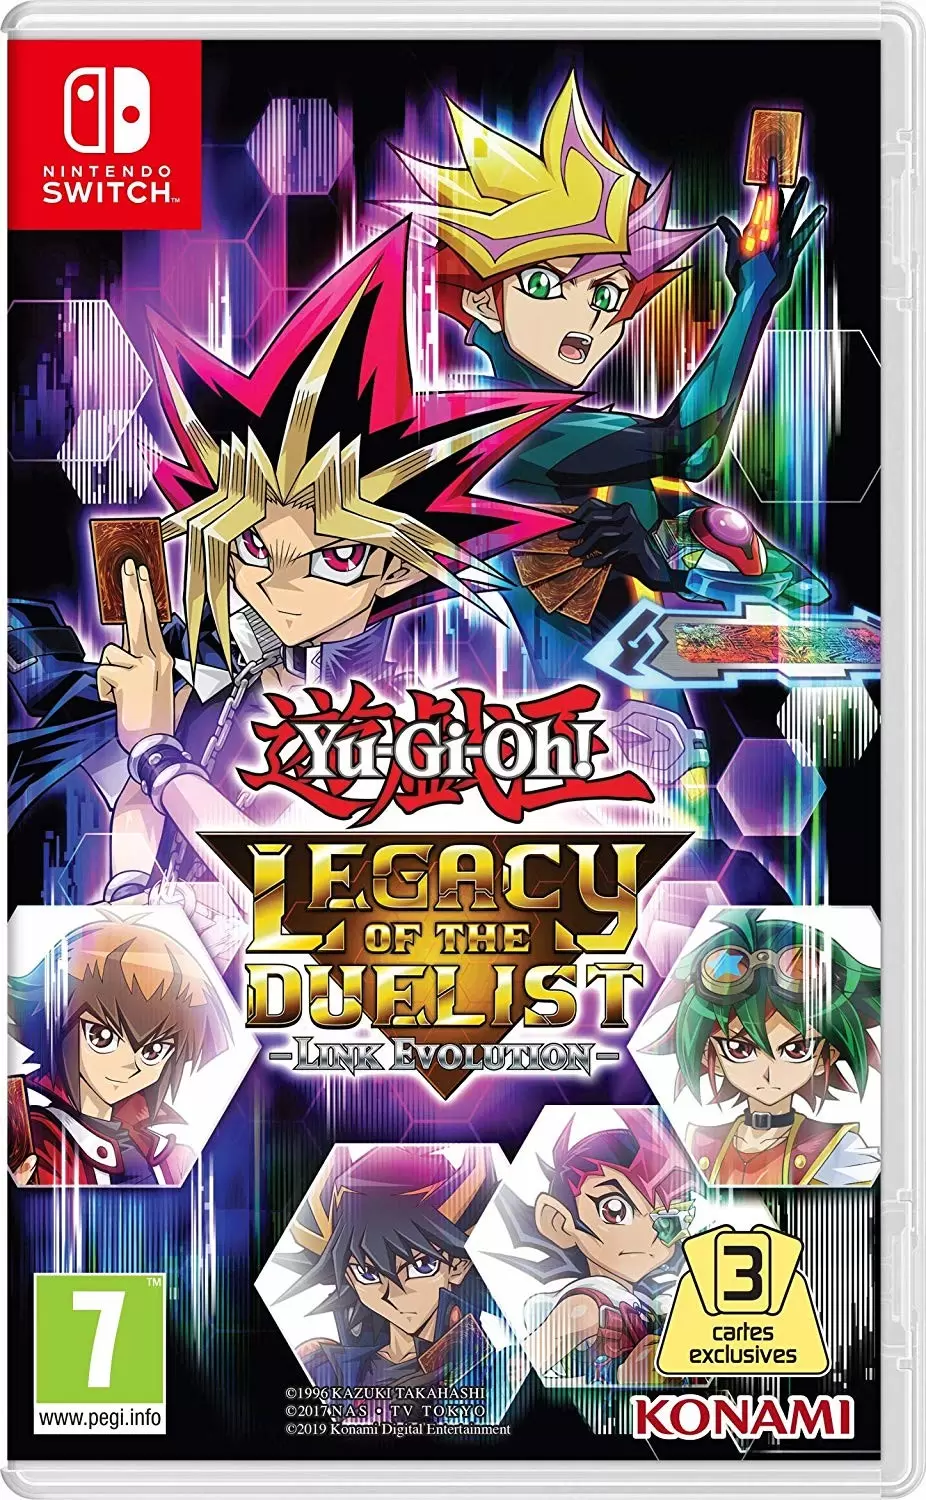 Nintendo Switch Games - Yu-gi-oh: Legacy Of The Duelist: Link Evolution